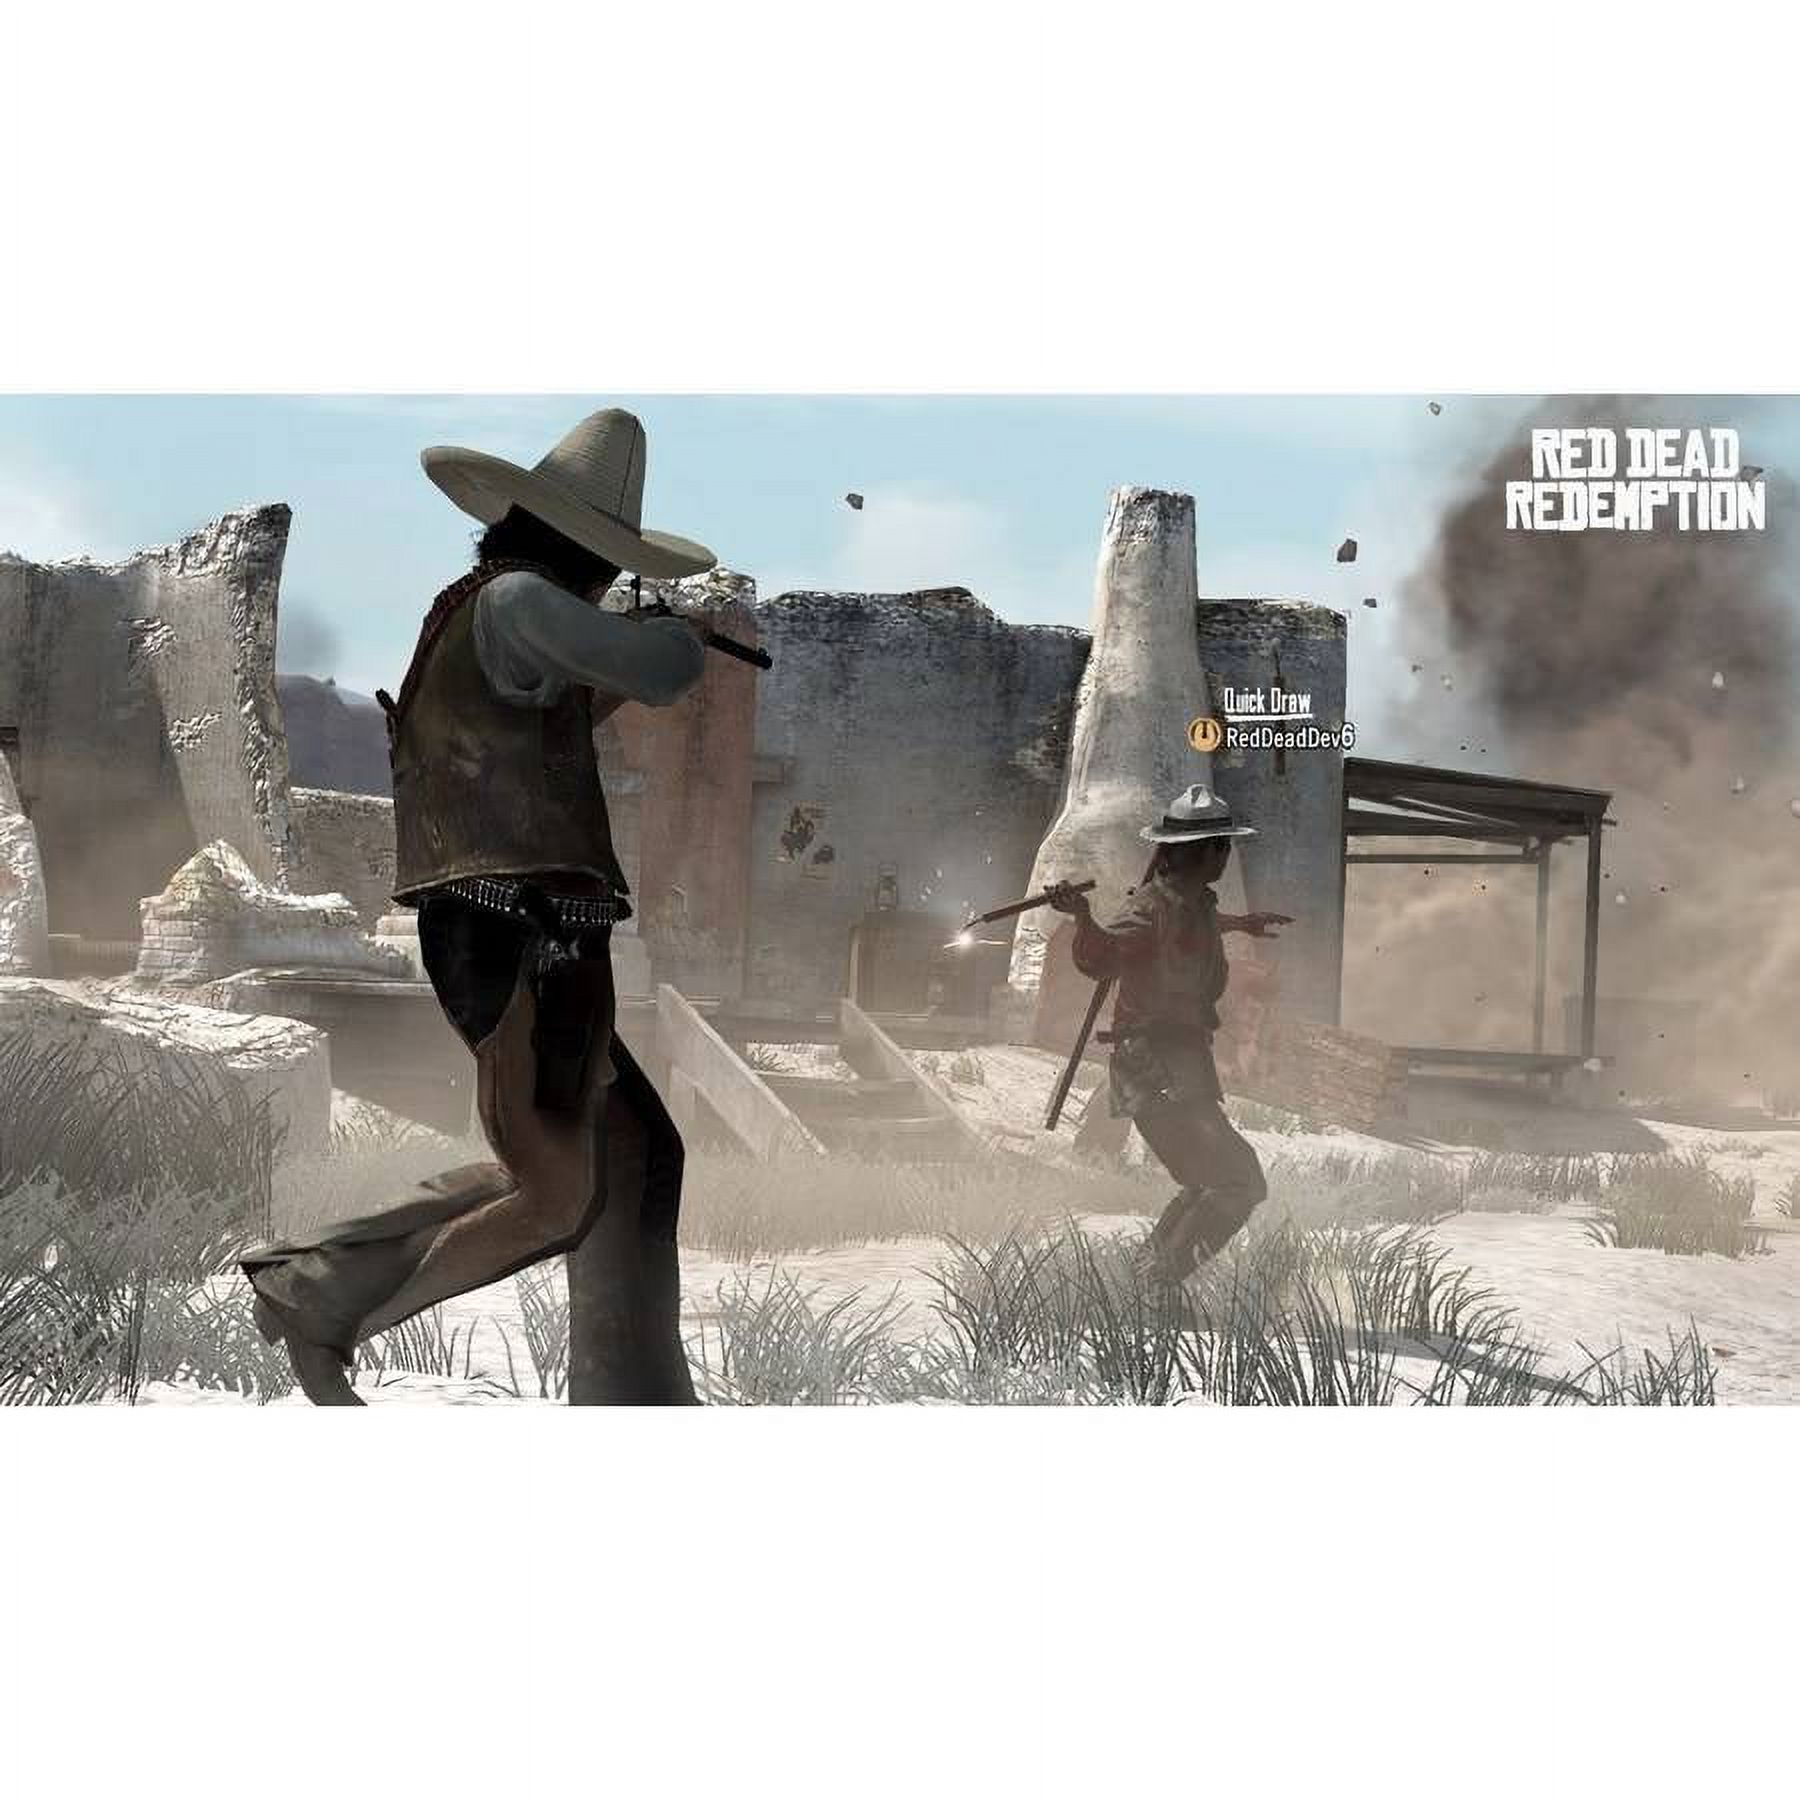 Red Dead Redemption: Game of the Year Edition, Rockstar Games, Xbox One/360, 710425490071 - image 3 of 9